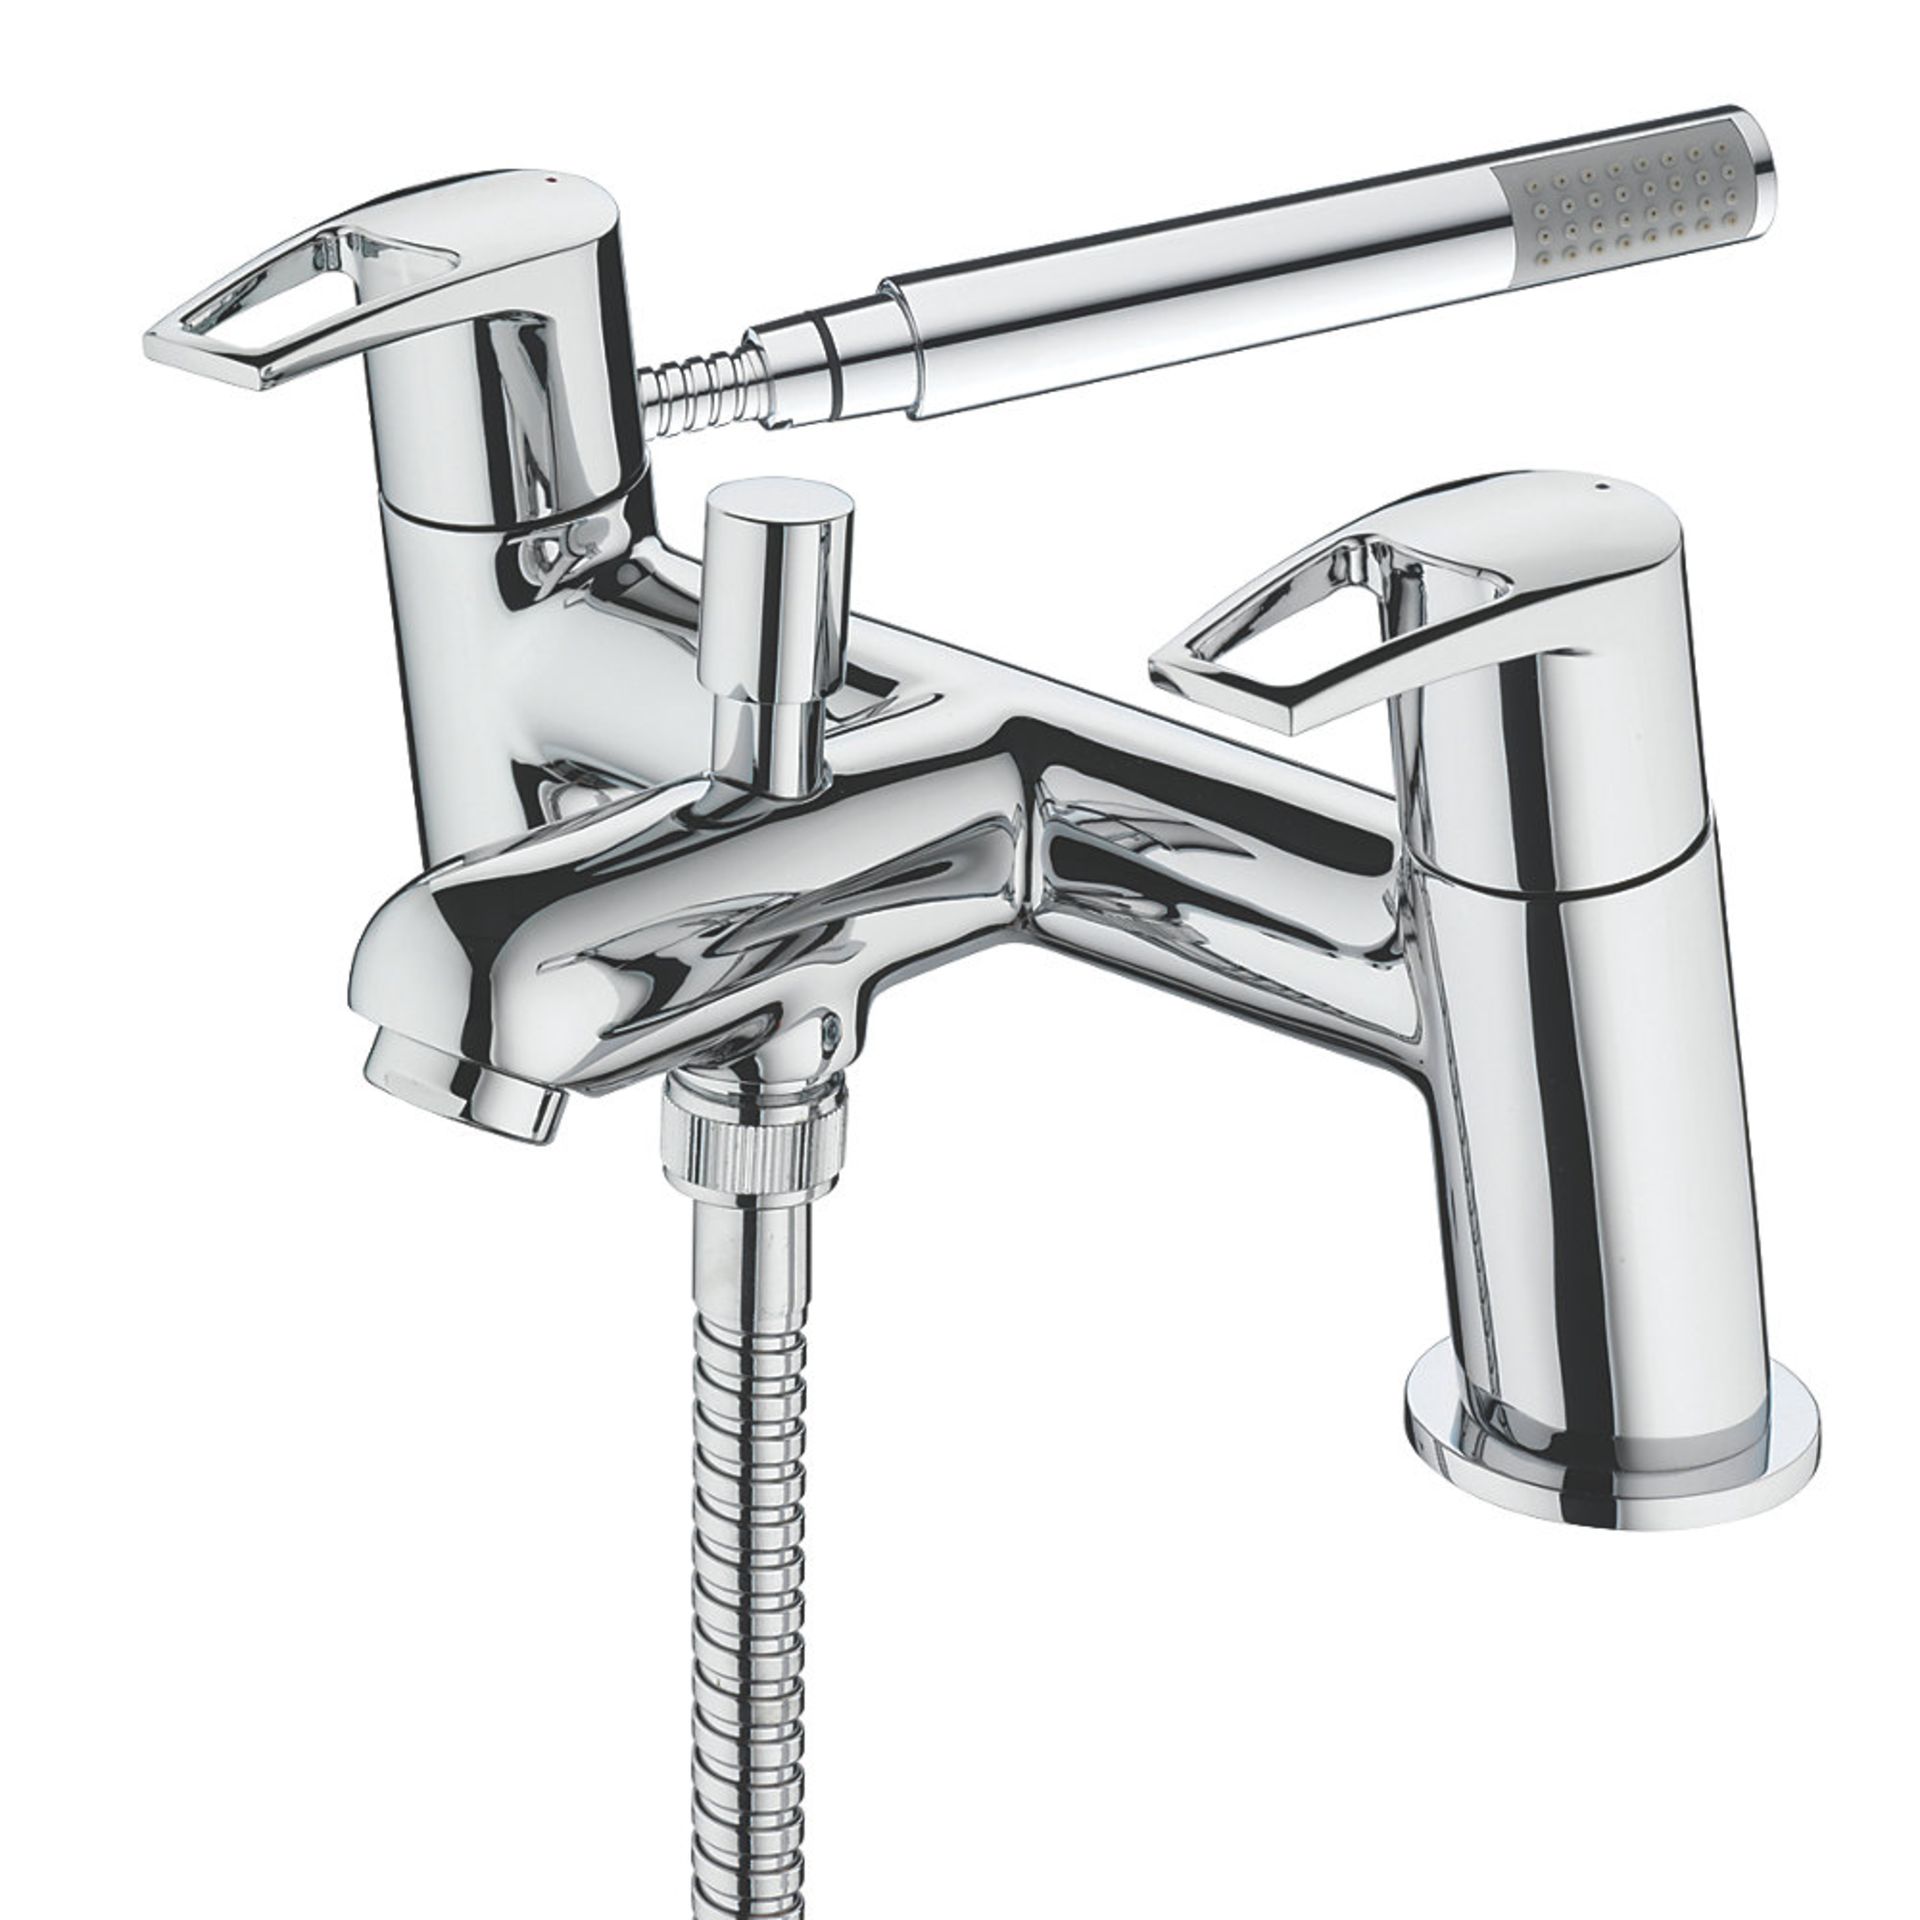 (PP129) BRISTAN SMILE SURFACE-MOUNTED BATH / SHOWER MIXER BATHROOM TAP. Designed and engineered in